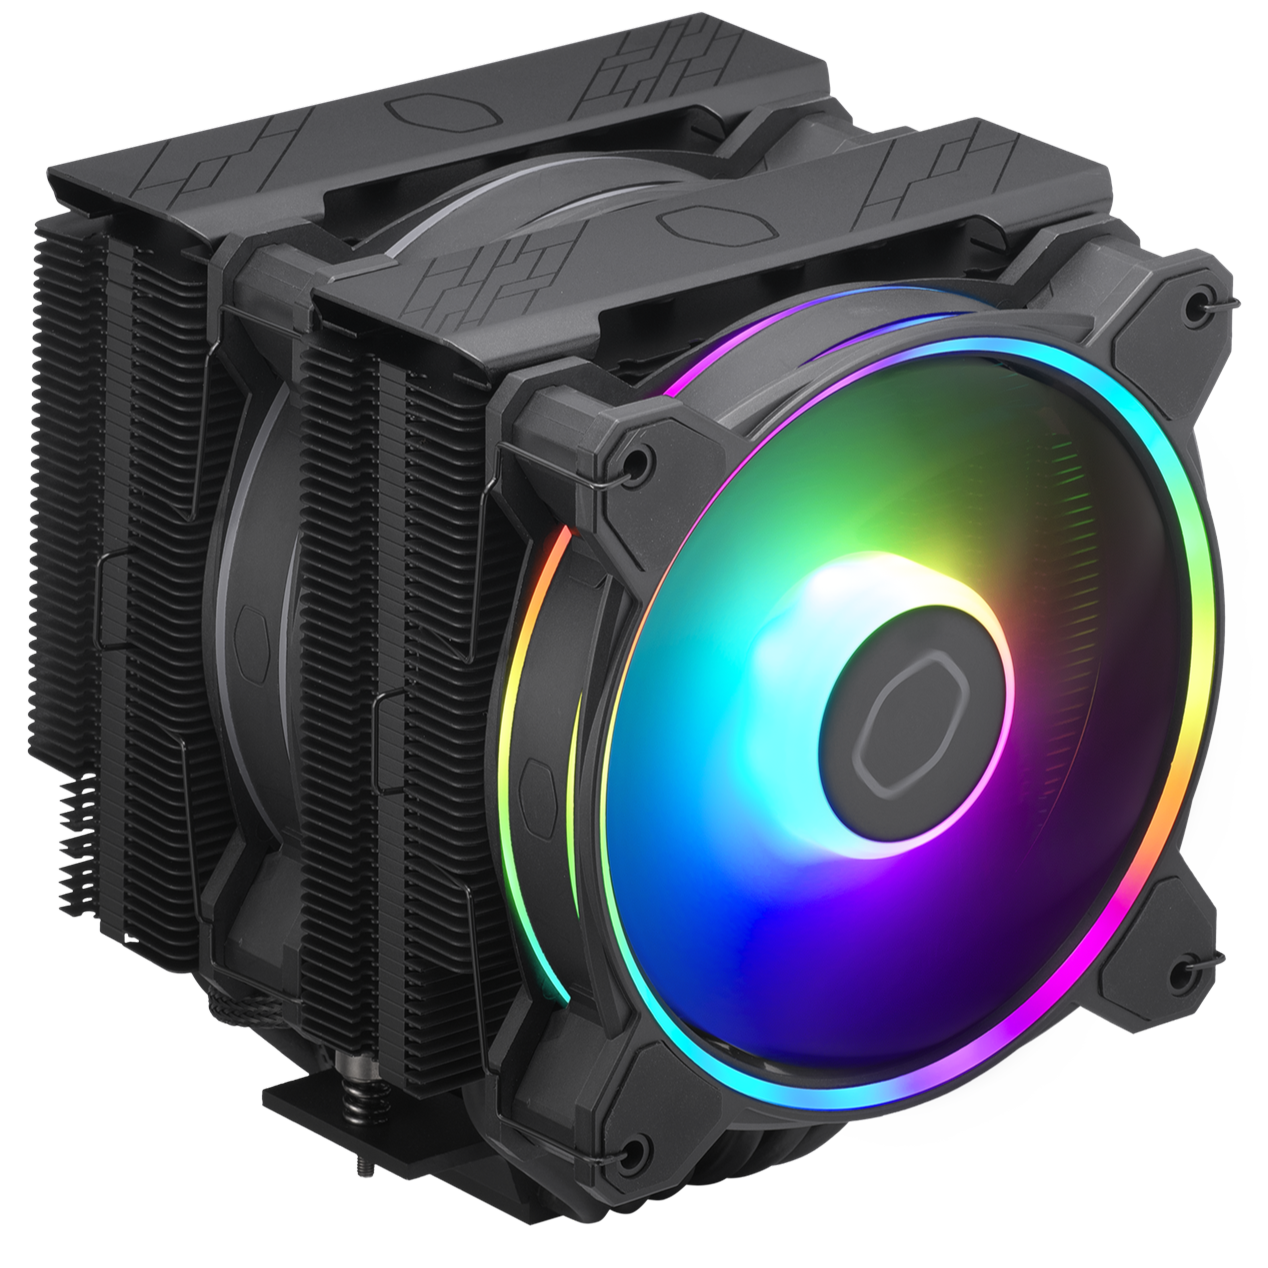 cooler master hyper 622 halo black in black color with two RGB fans